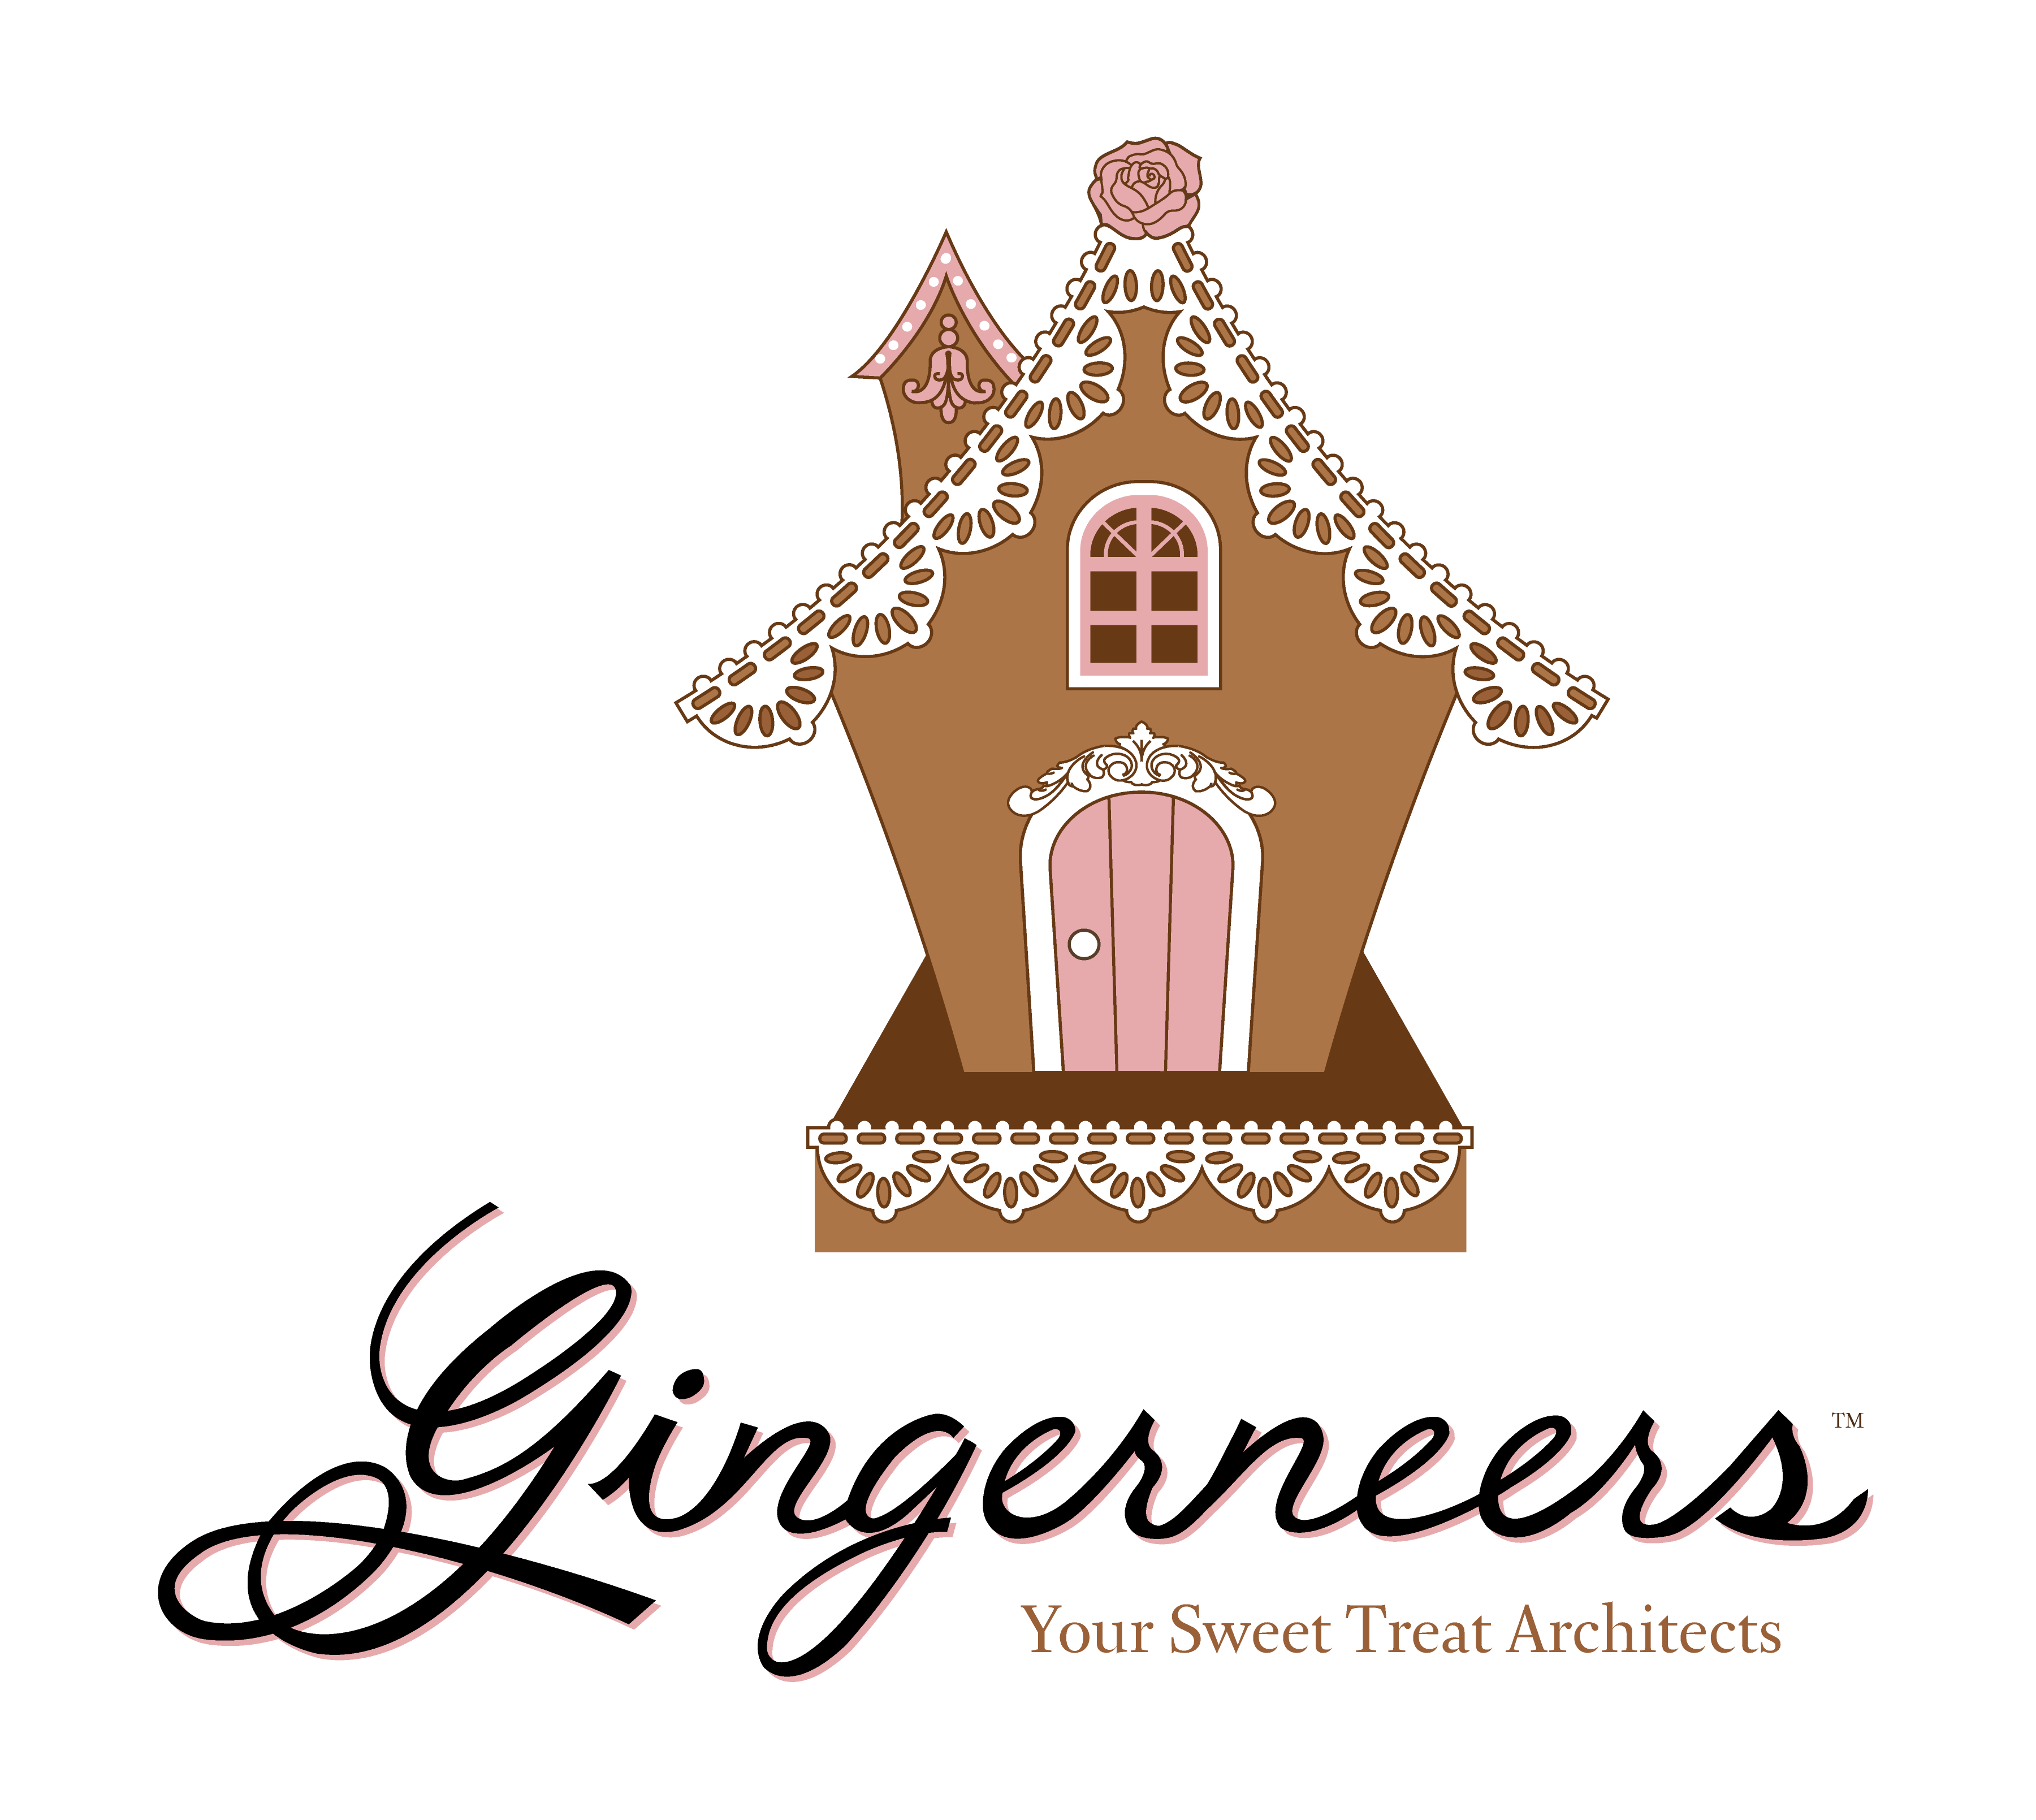 The Gingerneers logo. It has a small brown gingerbread house with white lace trim and a pink door. Gingerneers is written below it in cursive and below that it says your sweet treat architechs in a serif font.